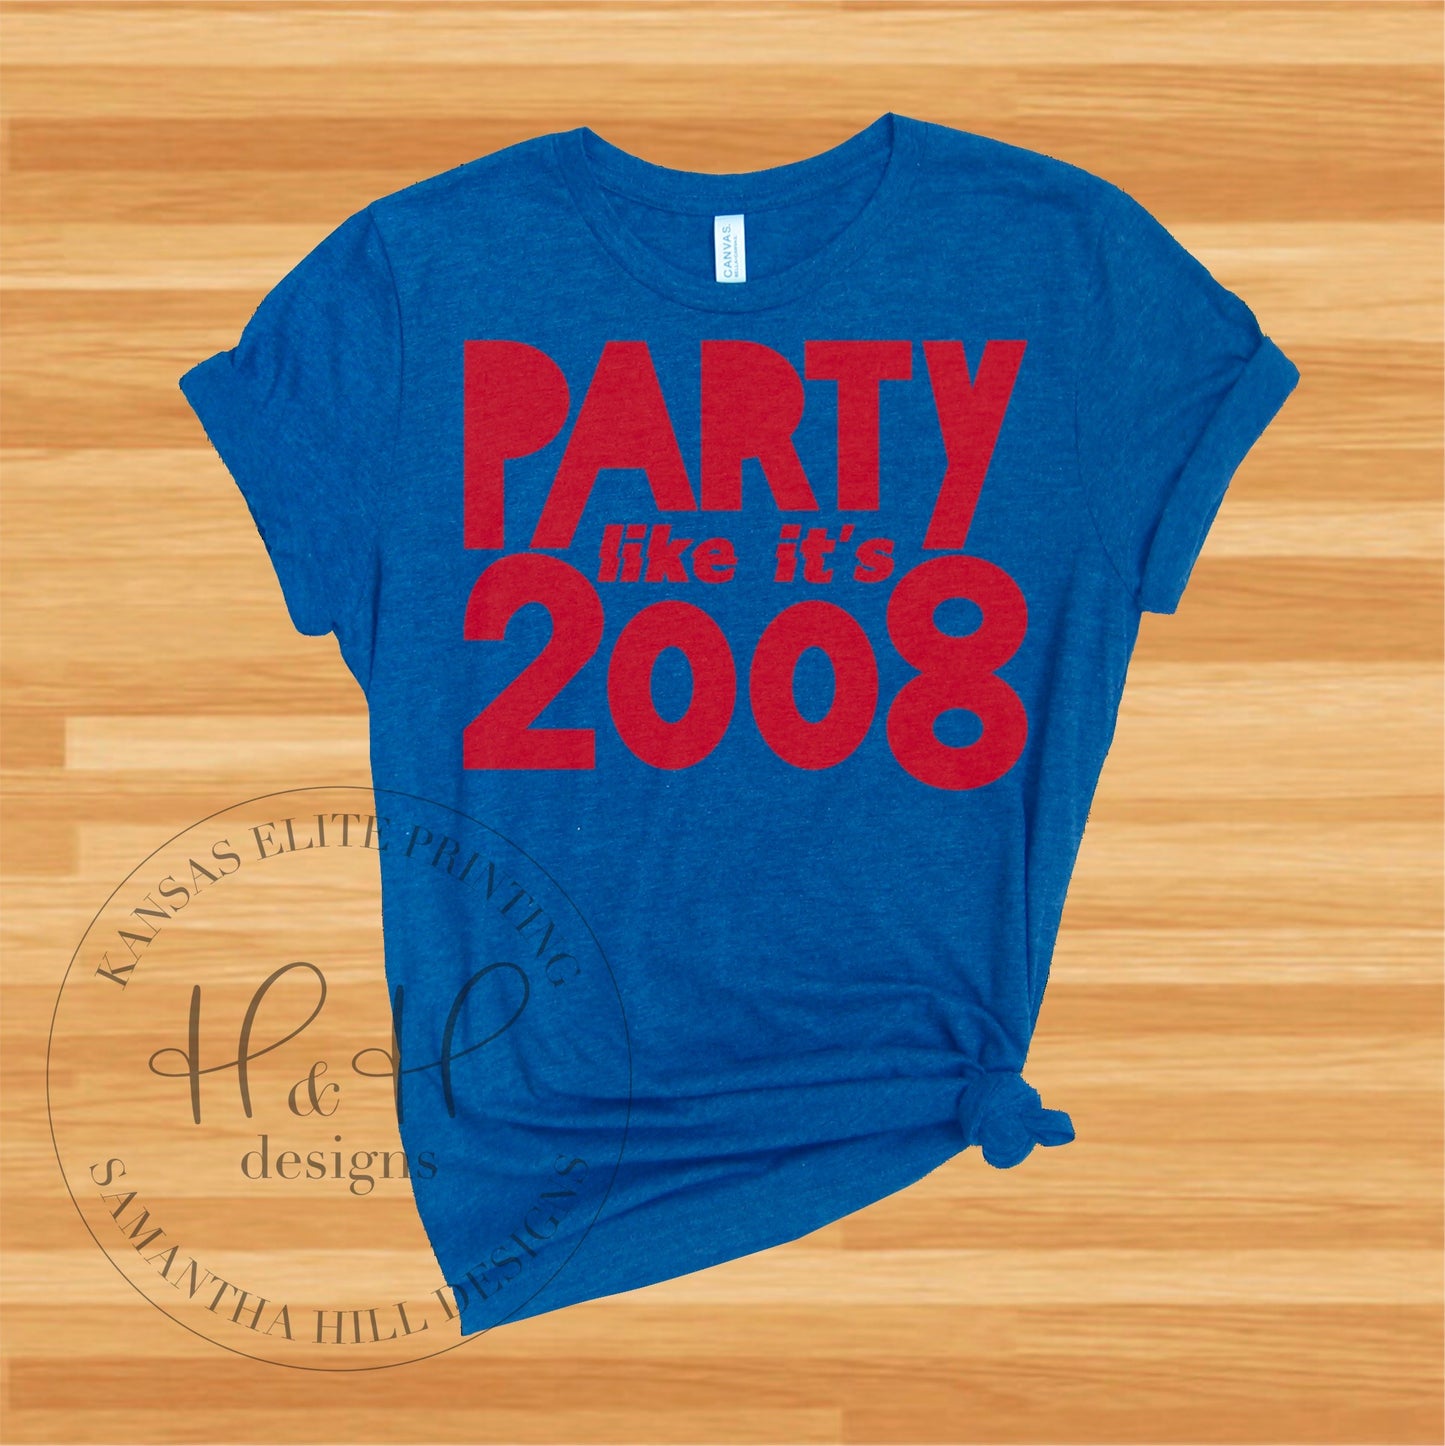 Party like it’s 2008